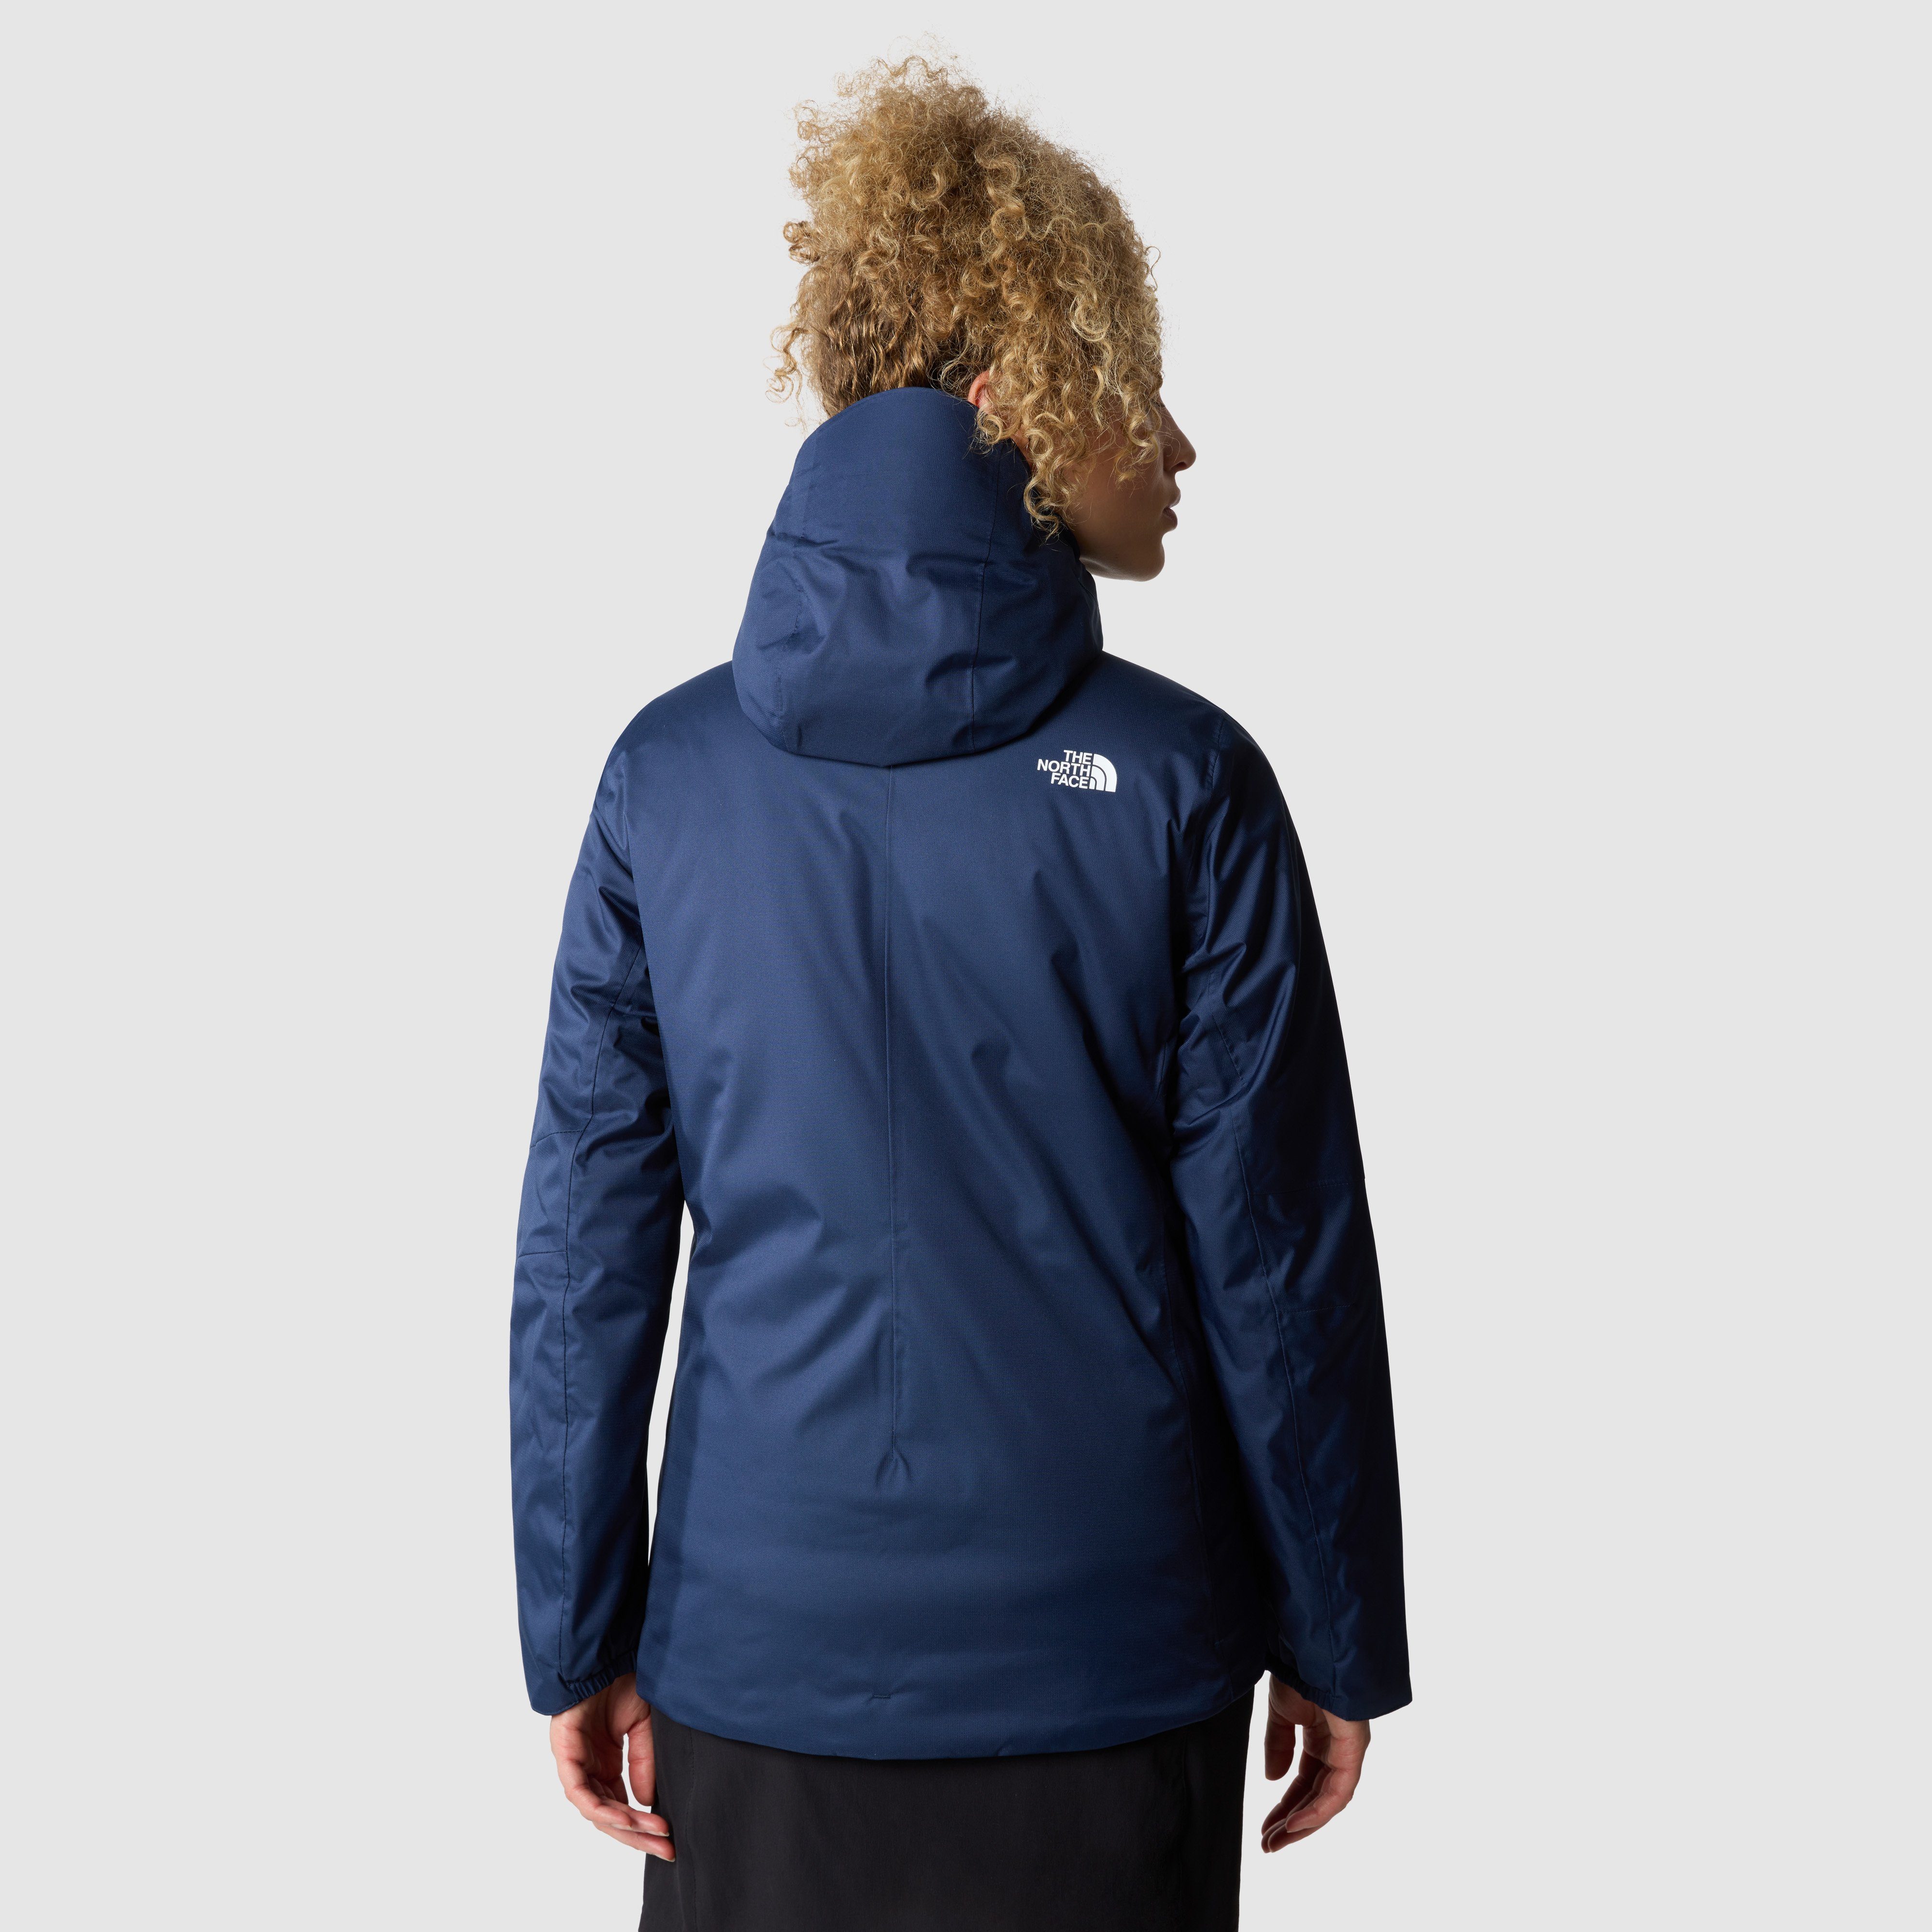 The mit JACKET QUEST Logodruck North Face Funktionsjacke W INSULATED